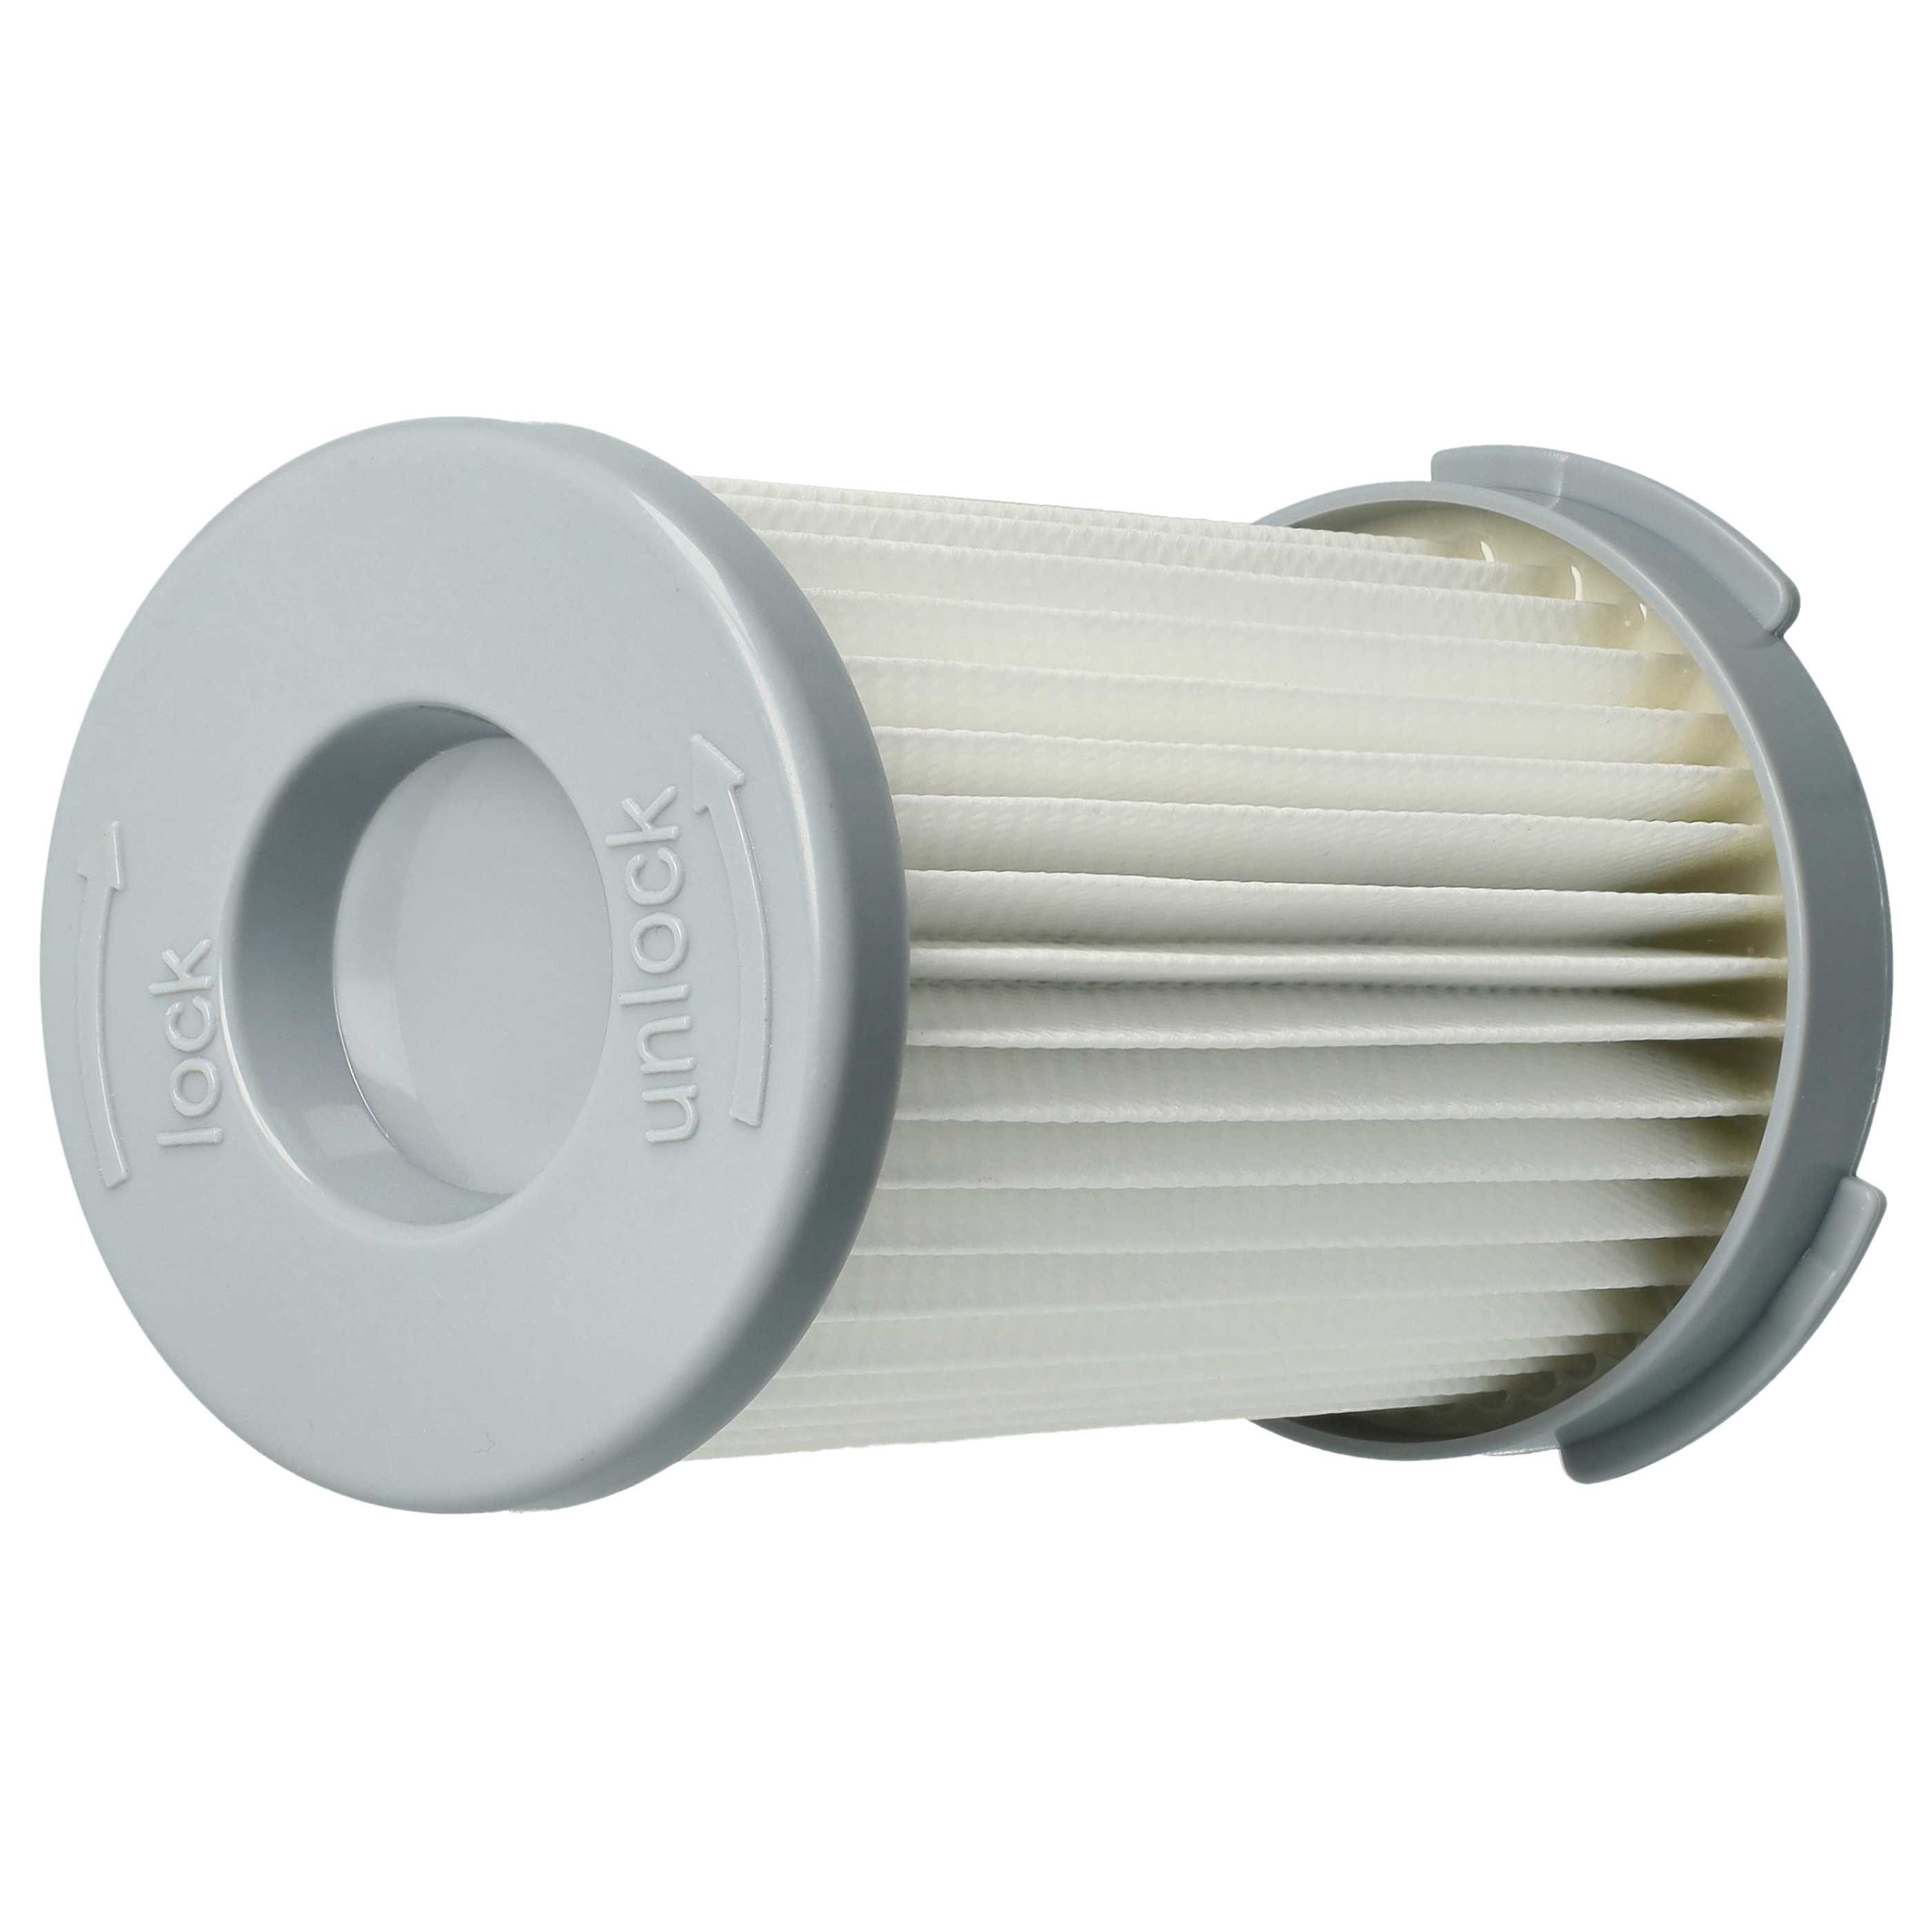 1x exhaust filter replaces Electrolux EF75B for AEG/Electrolux Vacuum Cleaner